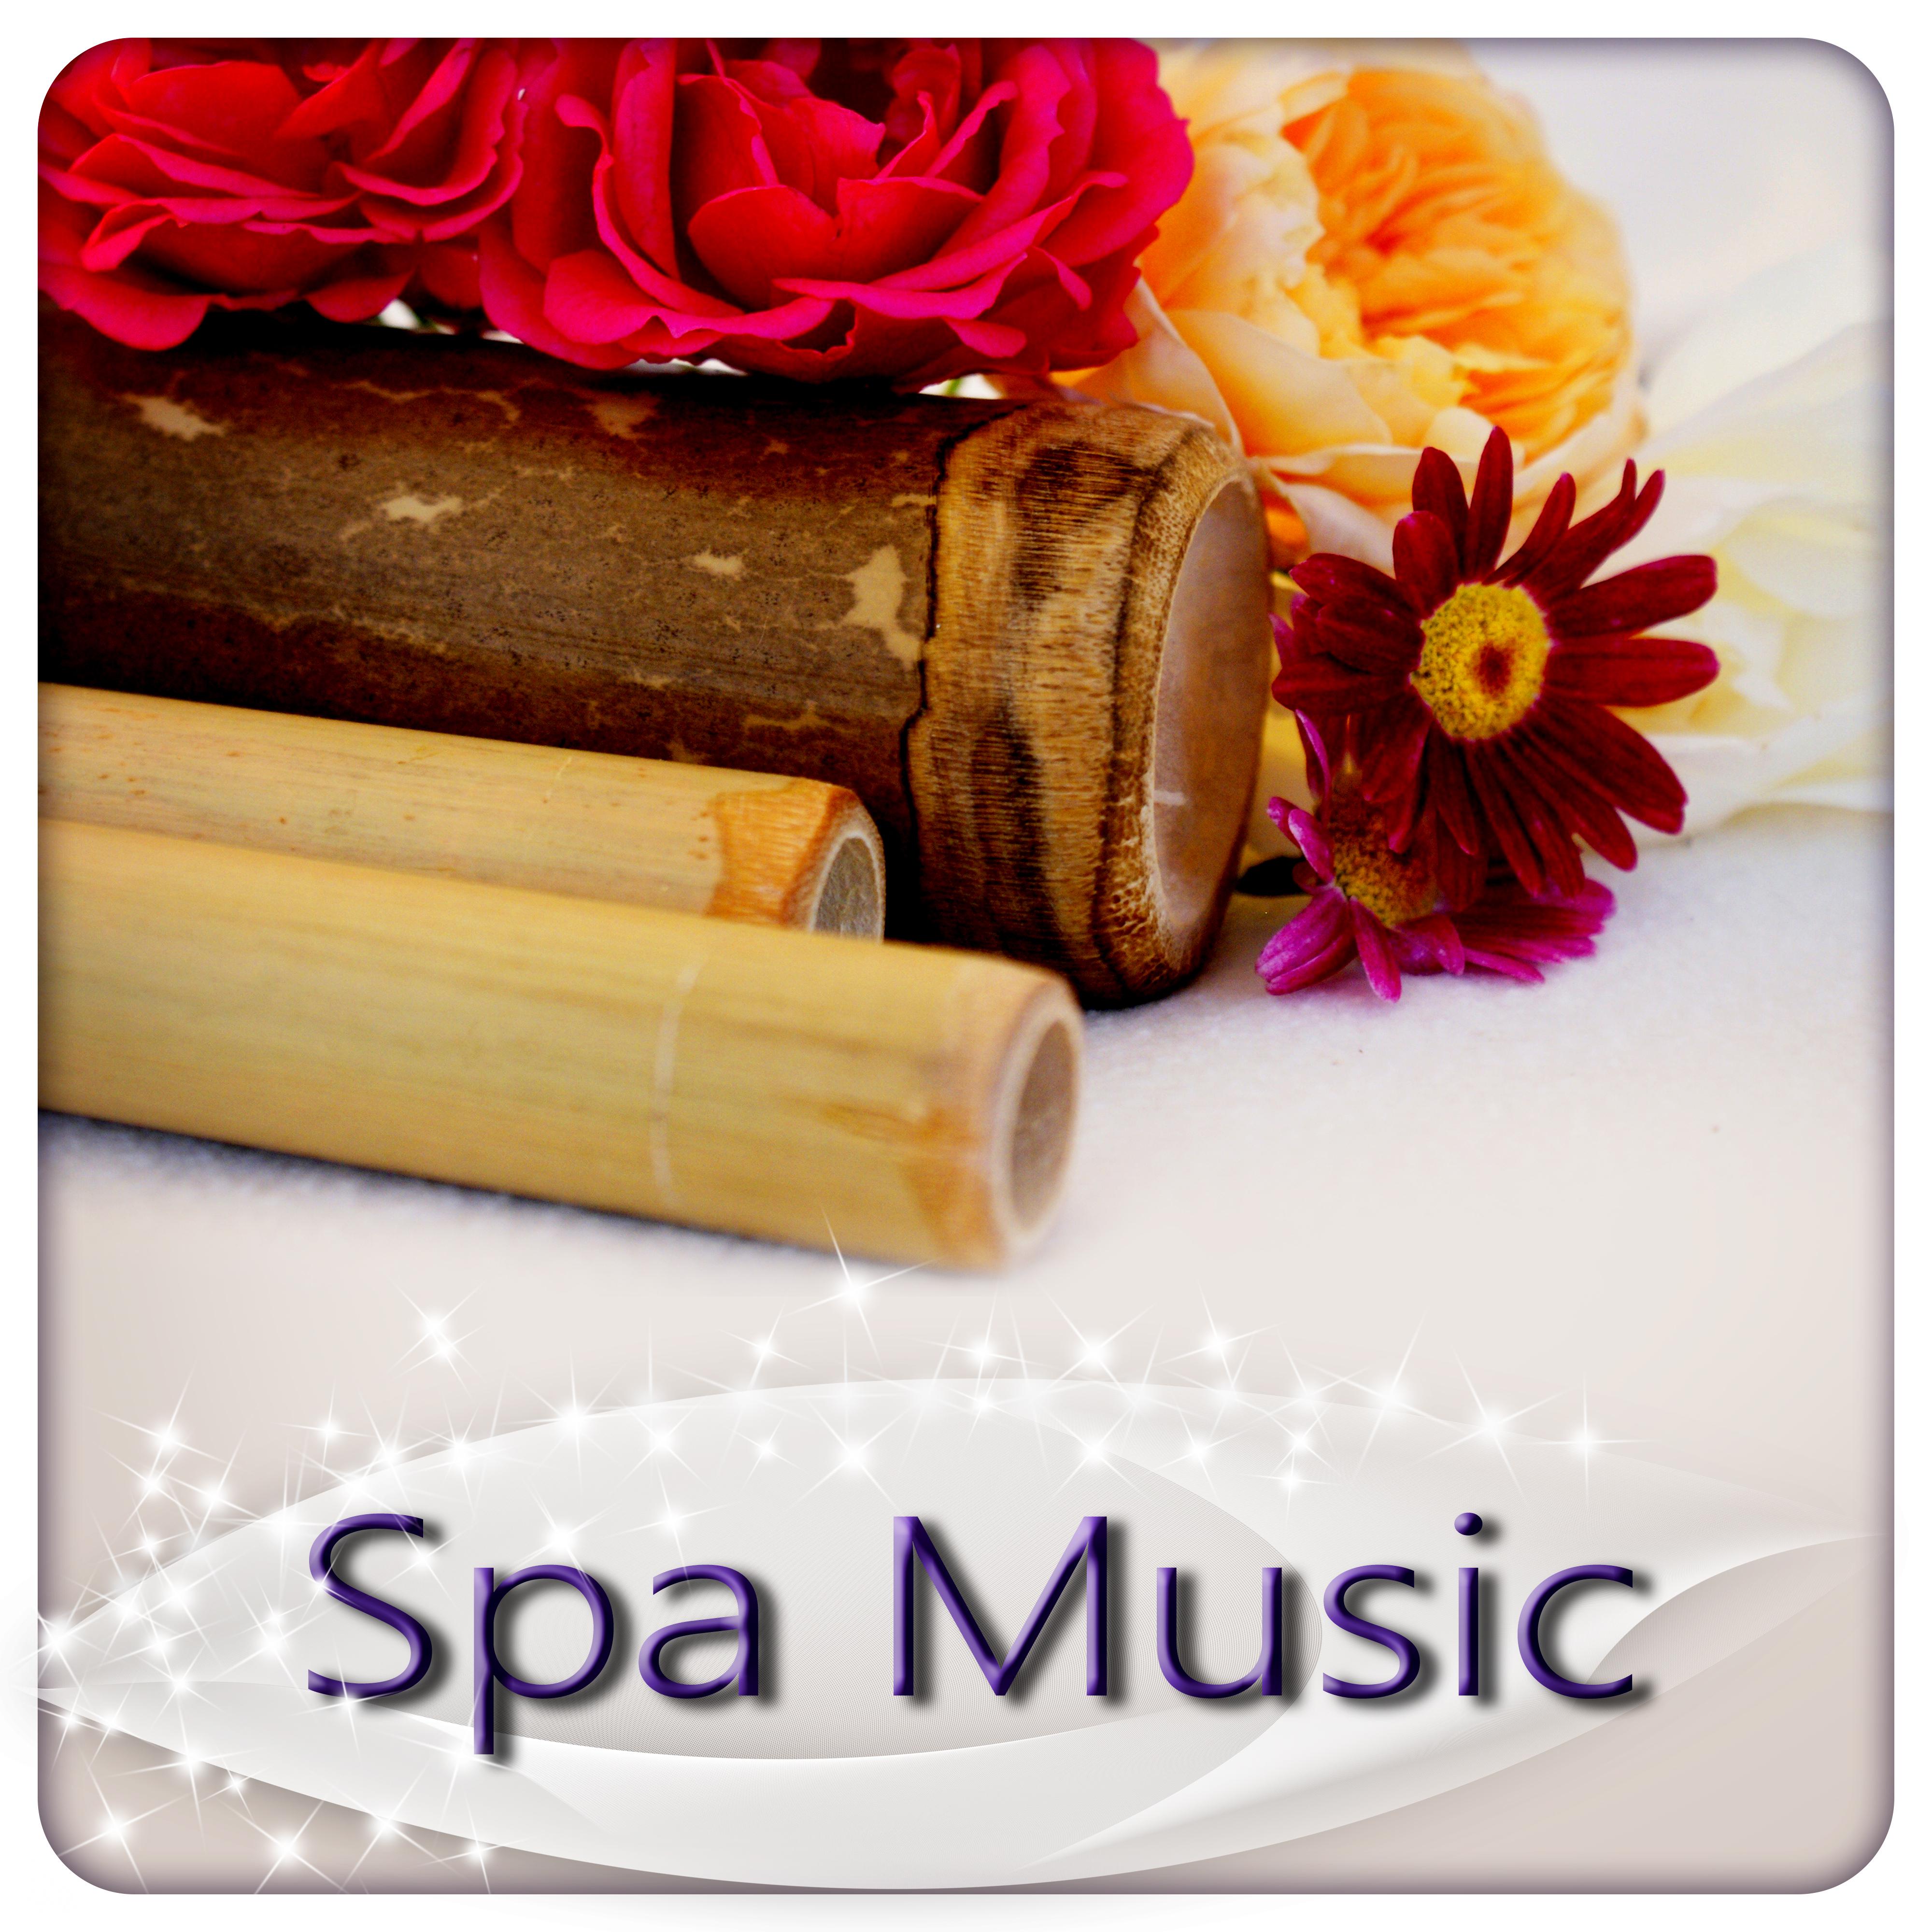 Spa Music for Massage Relaxation, Healing Meditation, Wellness Beauty, Yoga Practice, Deep Sleep and Well Being